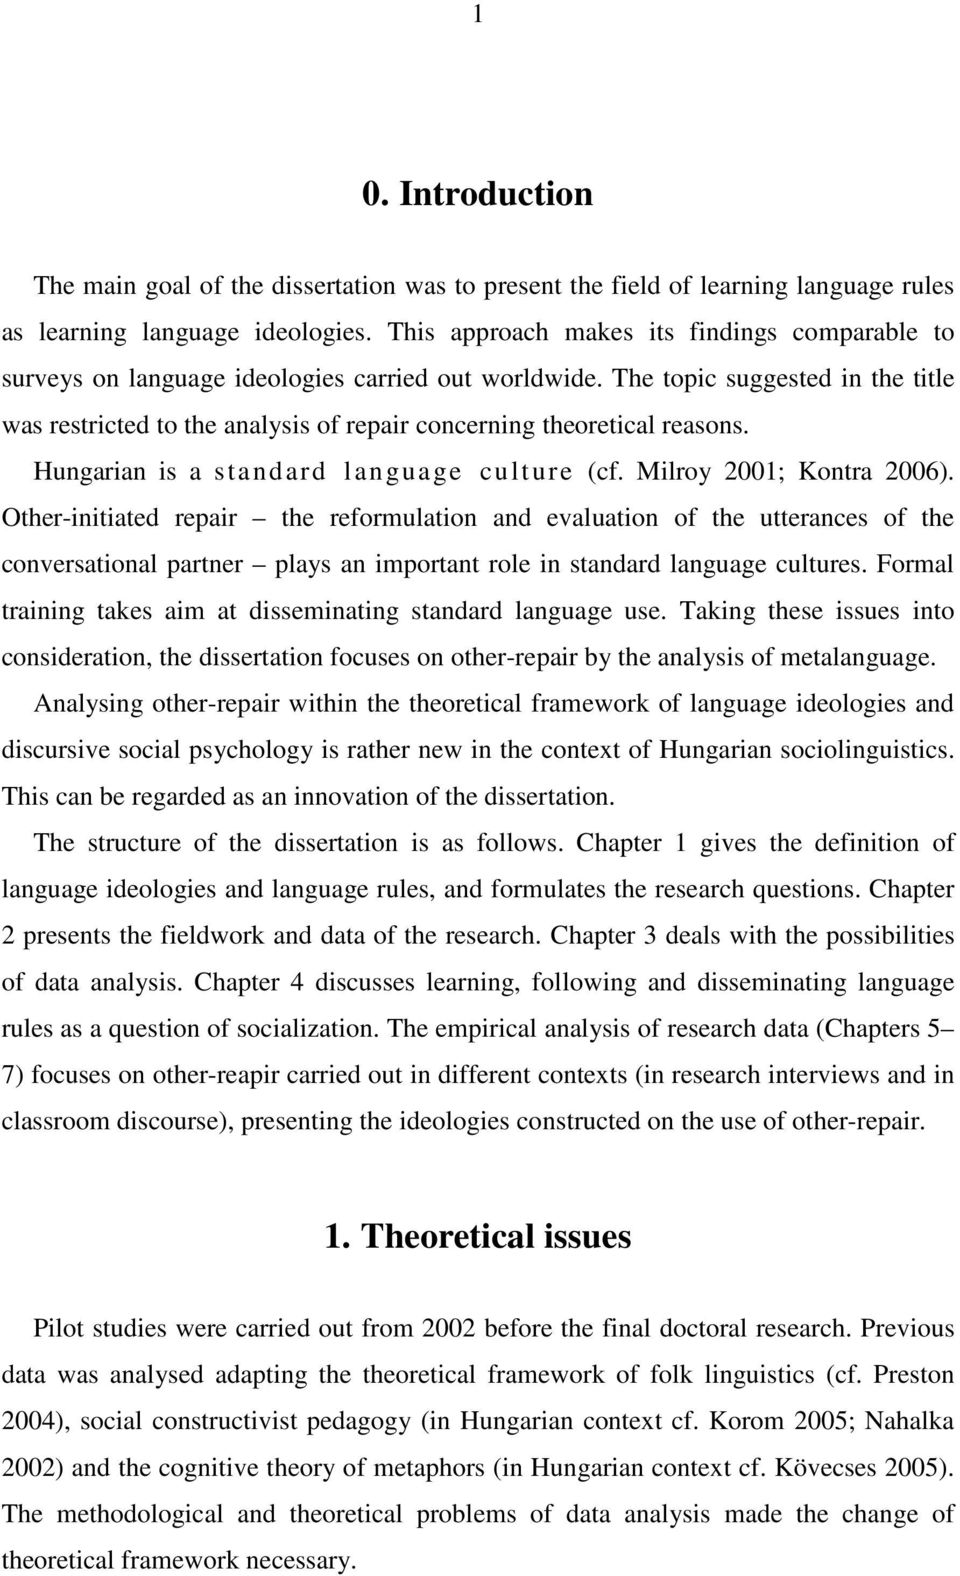 The topic suggested in the title was restricted to the analysis of repair concerning theoretical reasons. Hungarian is a standard language culture (cf. Milroy 2001; Kontra 2006).